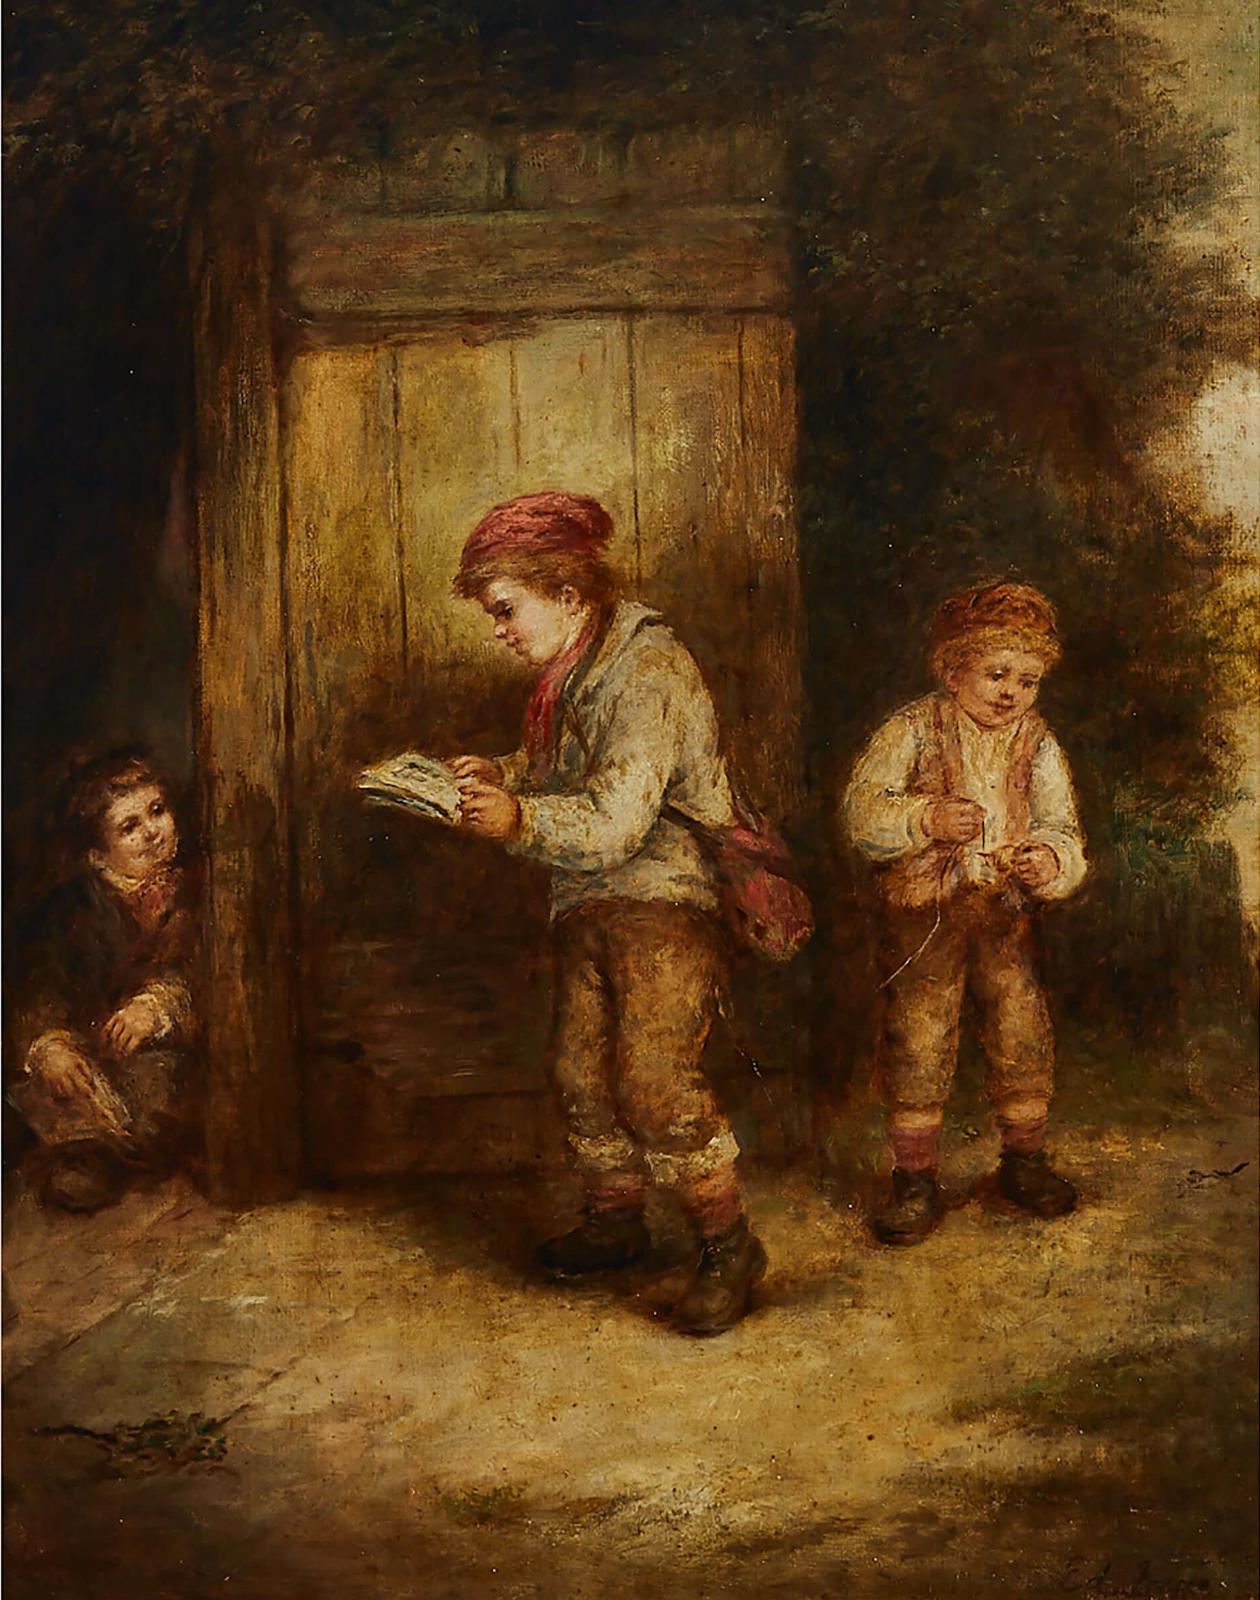 Mark Williams Langlois (1848-1924) - Three Boys Telling A Story Or Playing With A Spin Top